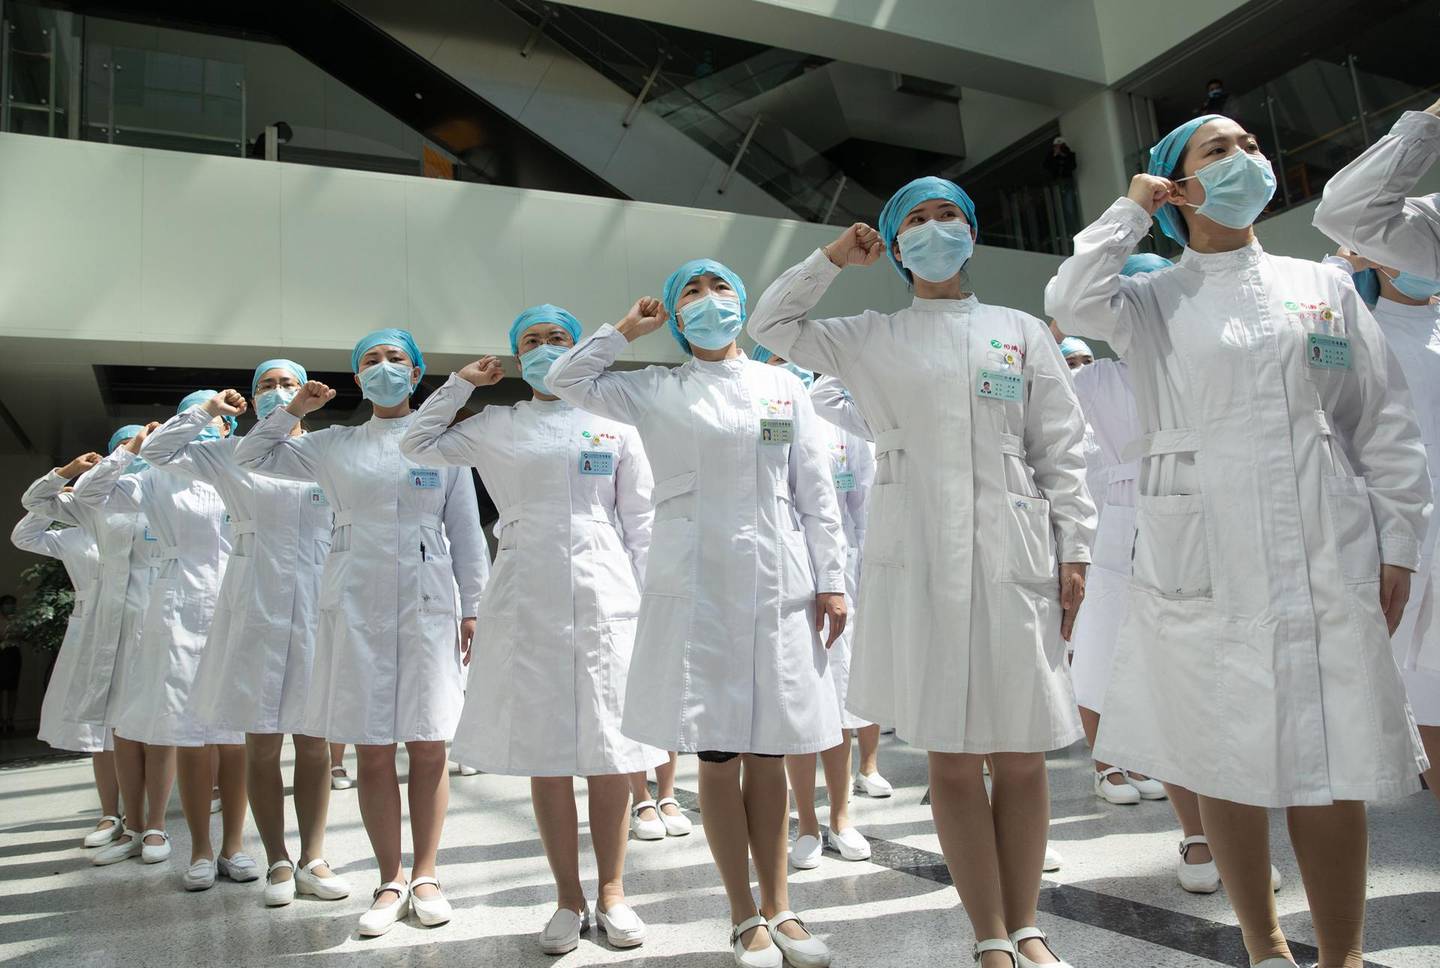 Nurses recite an oath during a ceremony marking International Nurses Day, at Tongji Hospital in Wuhan, in China's central Hubei province on May 12, 2020. As frontline hospital staff are constantly facing the risks from the COVID-19 coronavirus outbreak, the world is marking International Nurses Day, celebrated around the world every May 12, the anniversary of Florence Nightingale's birth. - China OUT
 / AFP / STR
